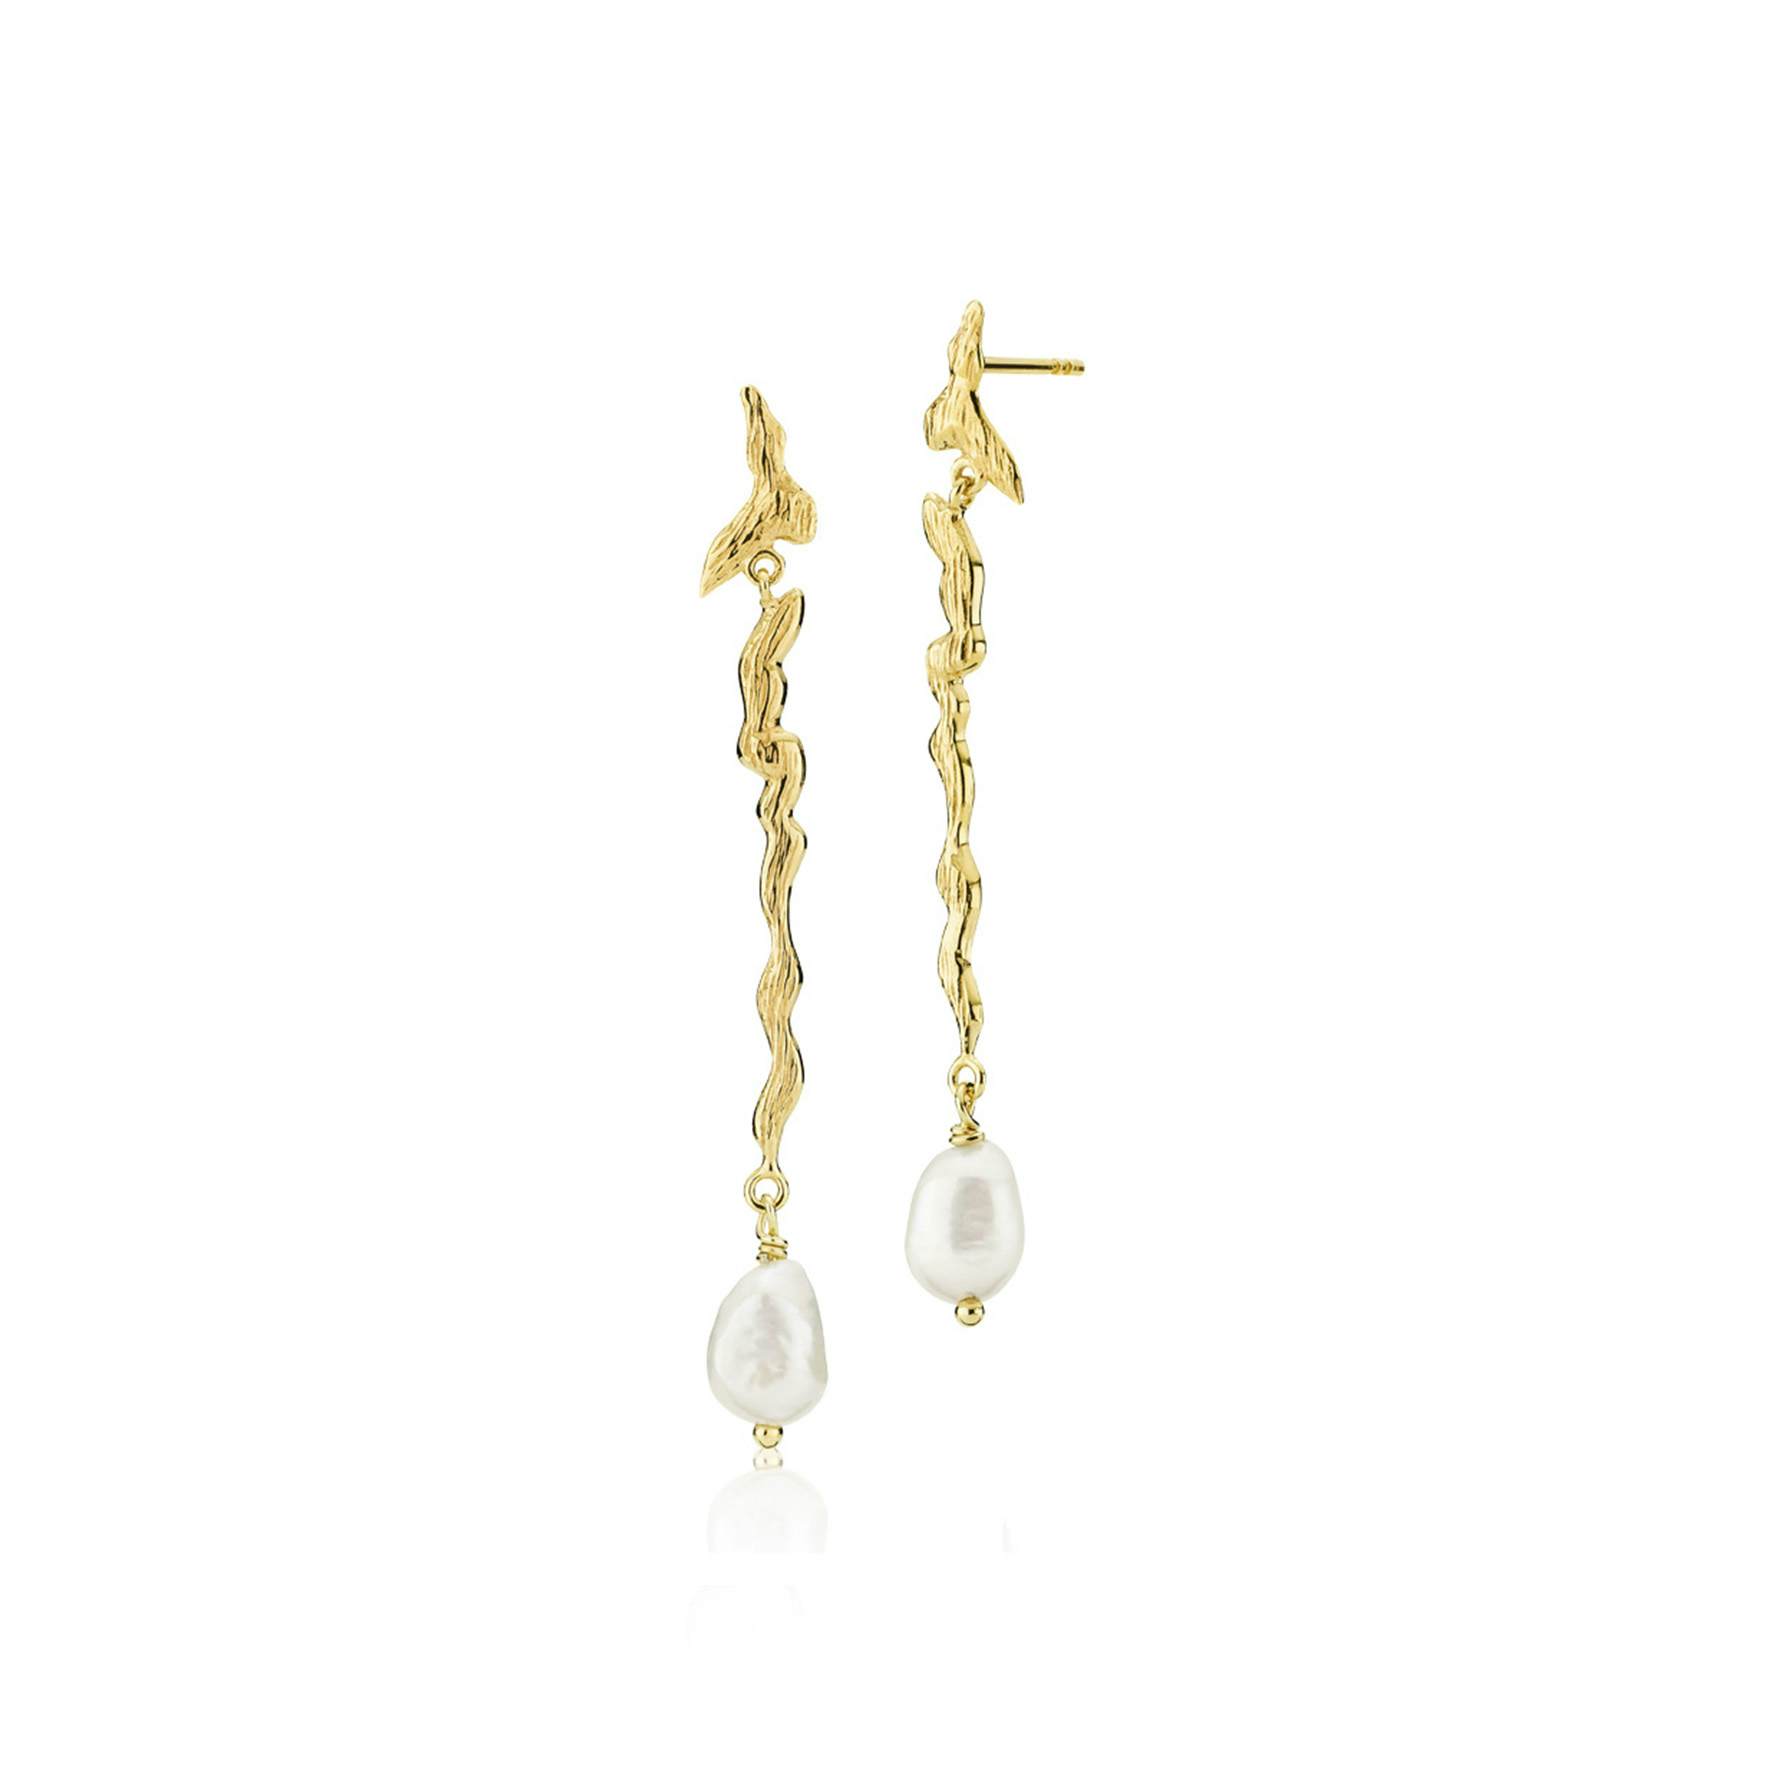 Fairy Long Earrings from Izabel Camille in Goldplated-Silver Sterling 925|Freshwater Pearl